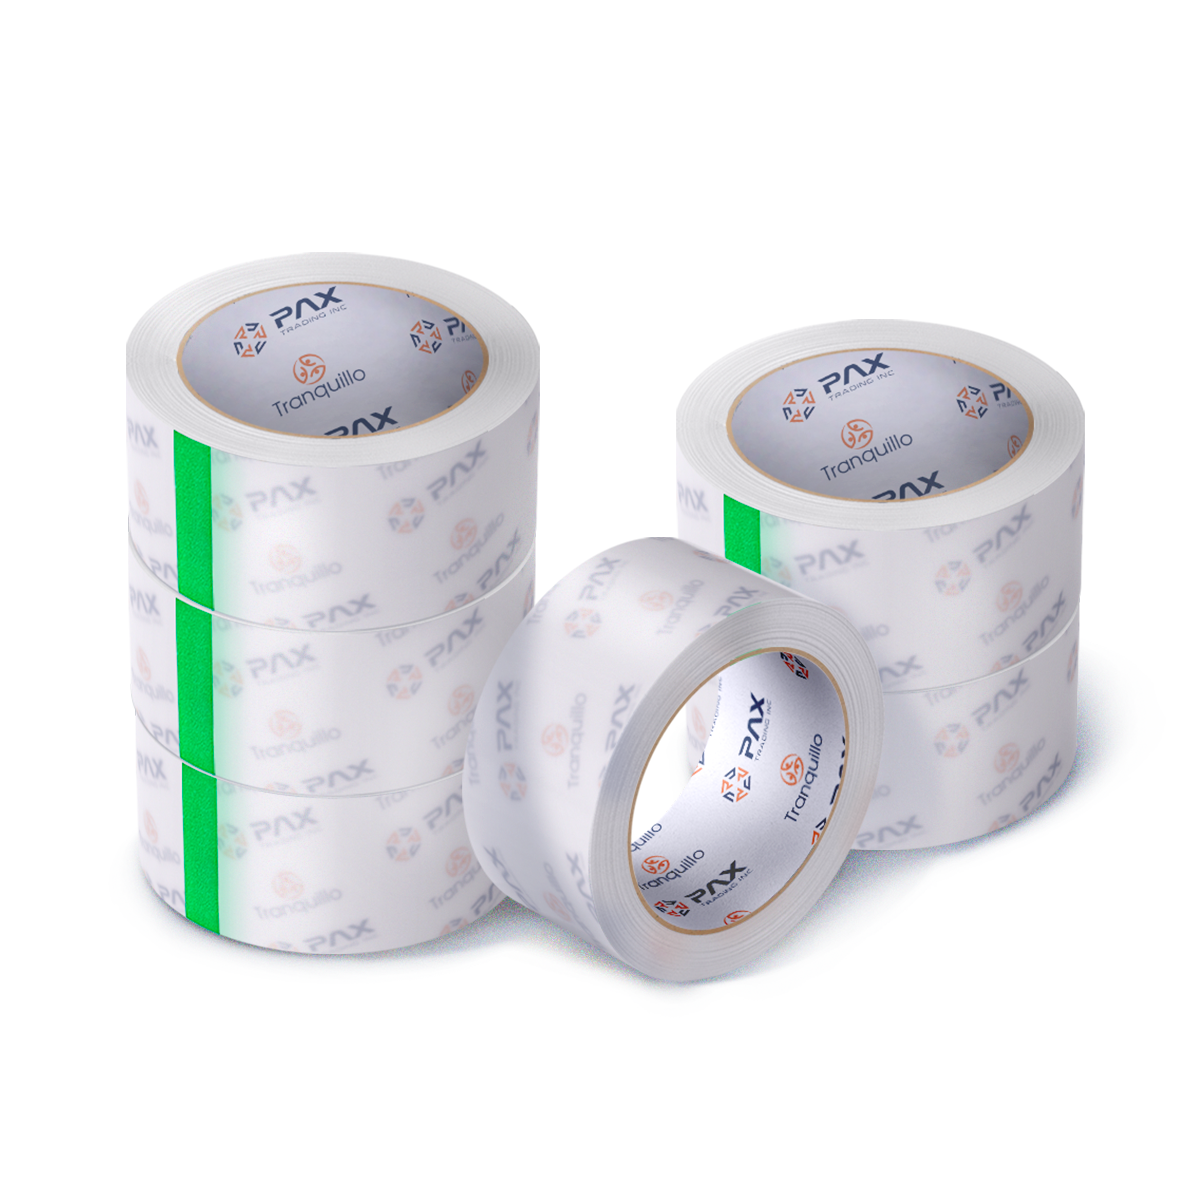  Blue Packing Tape, Moving Tape 2 x 110 Yard,2.0 mil Thick,  Heavy Duty (1 Roll) : Office Products